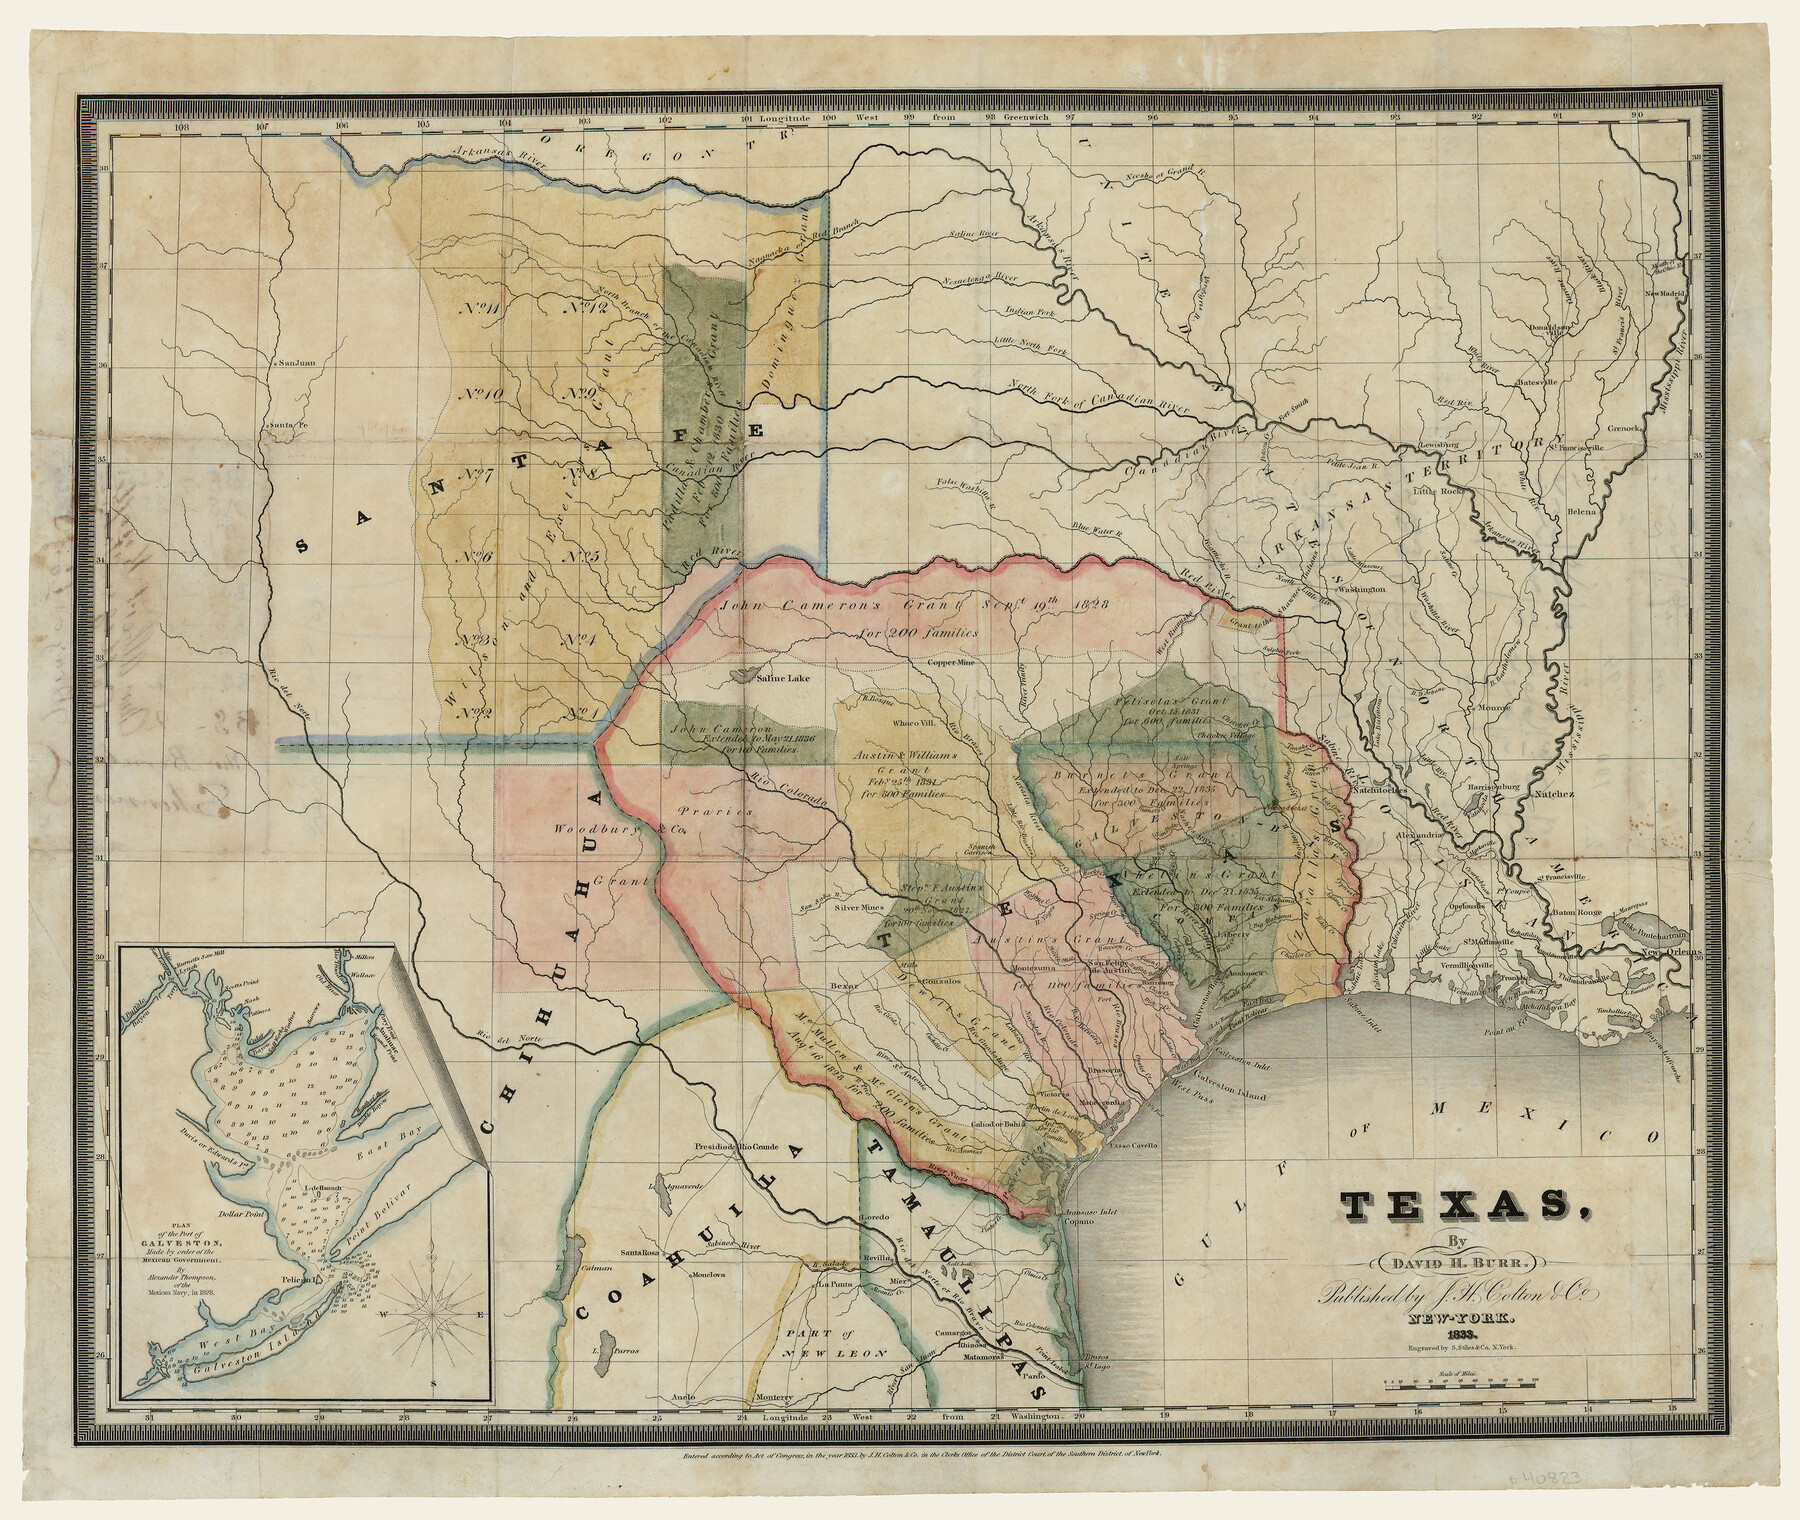 93836, Texas, Holcomb Digital Map Collection